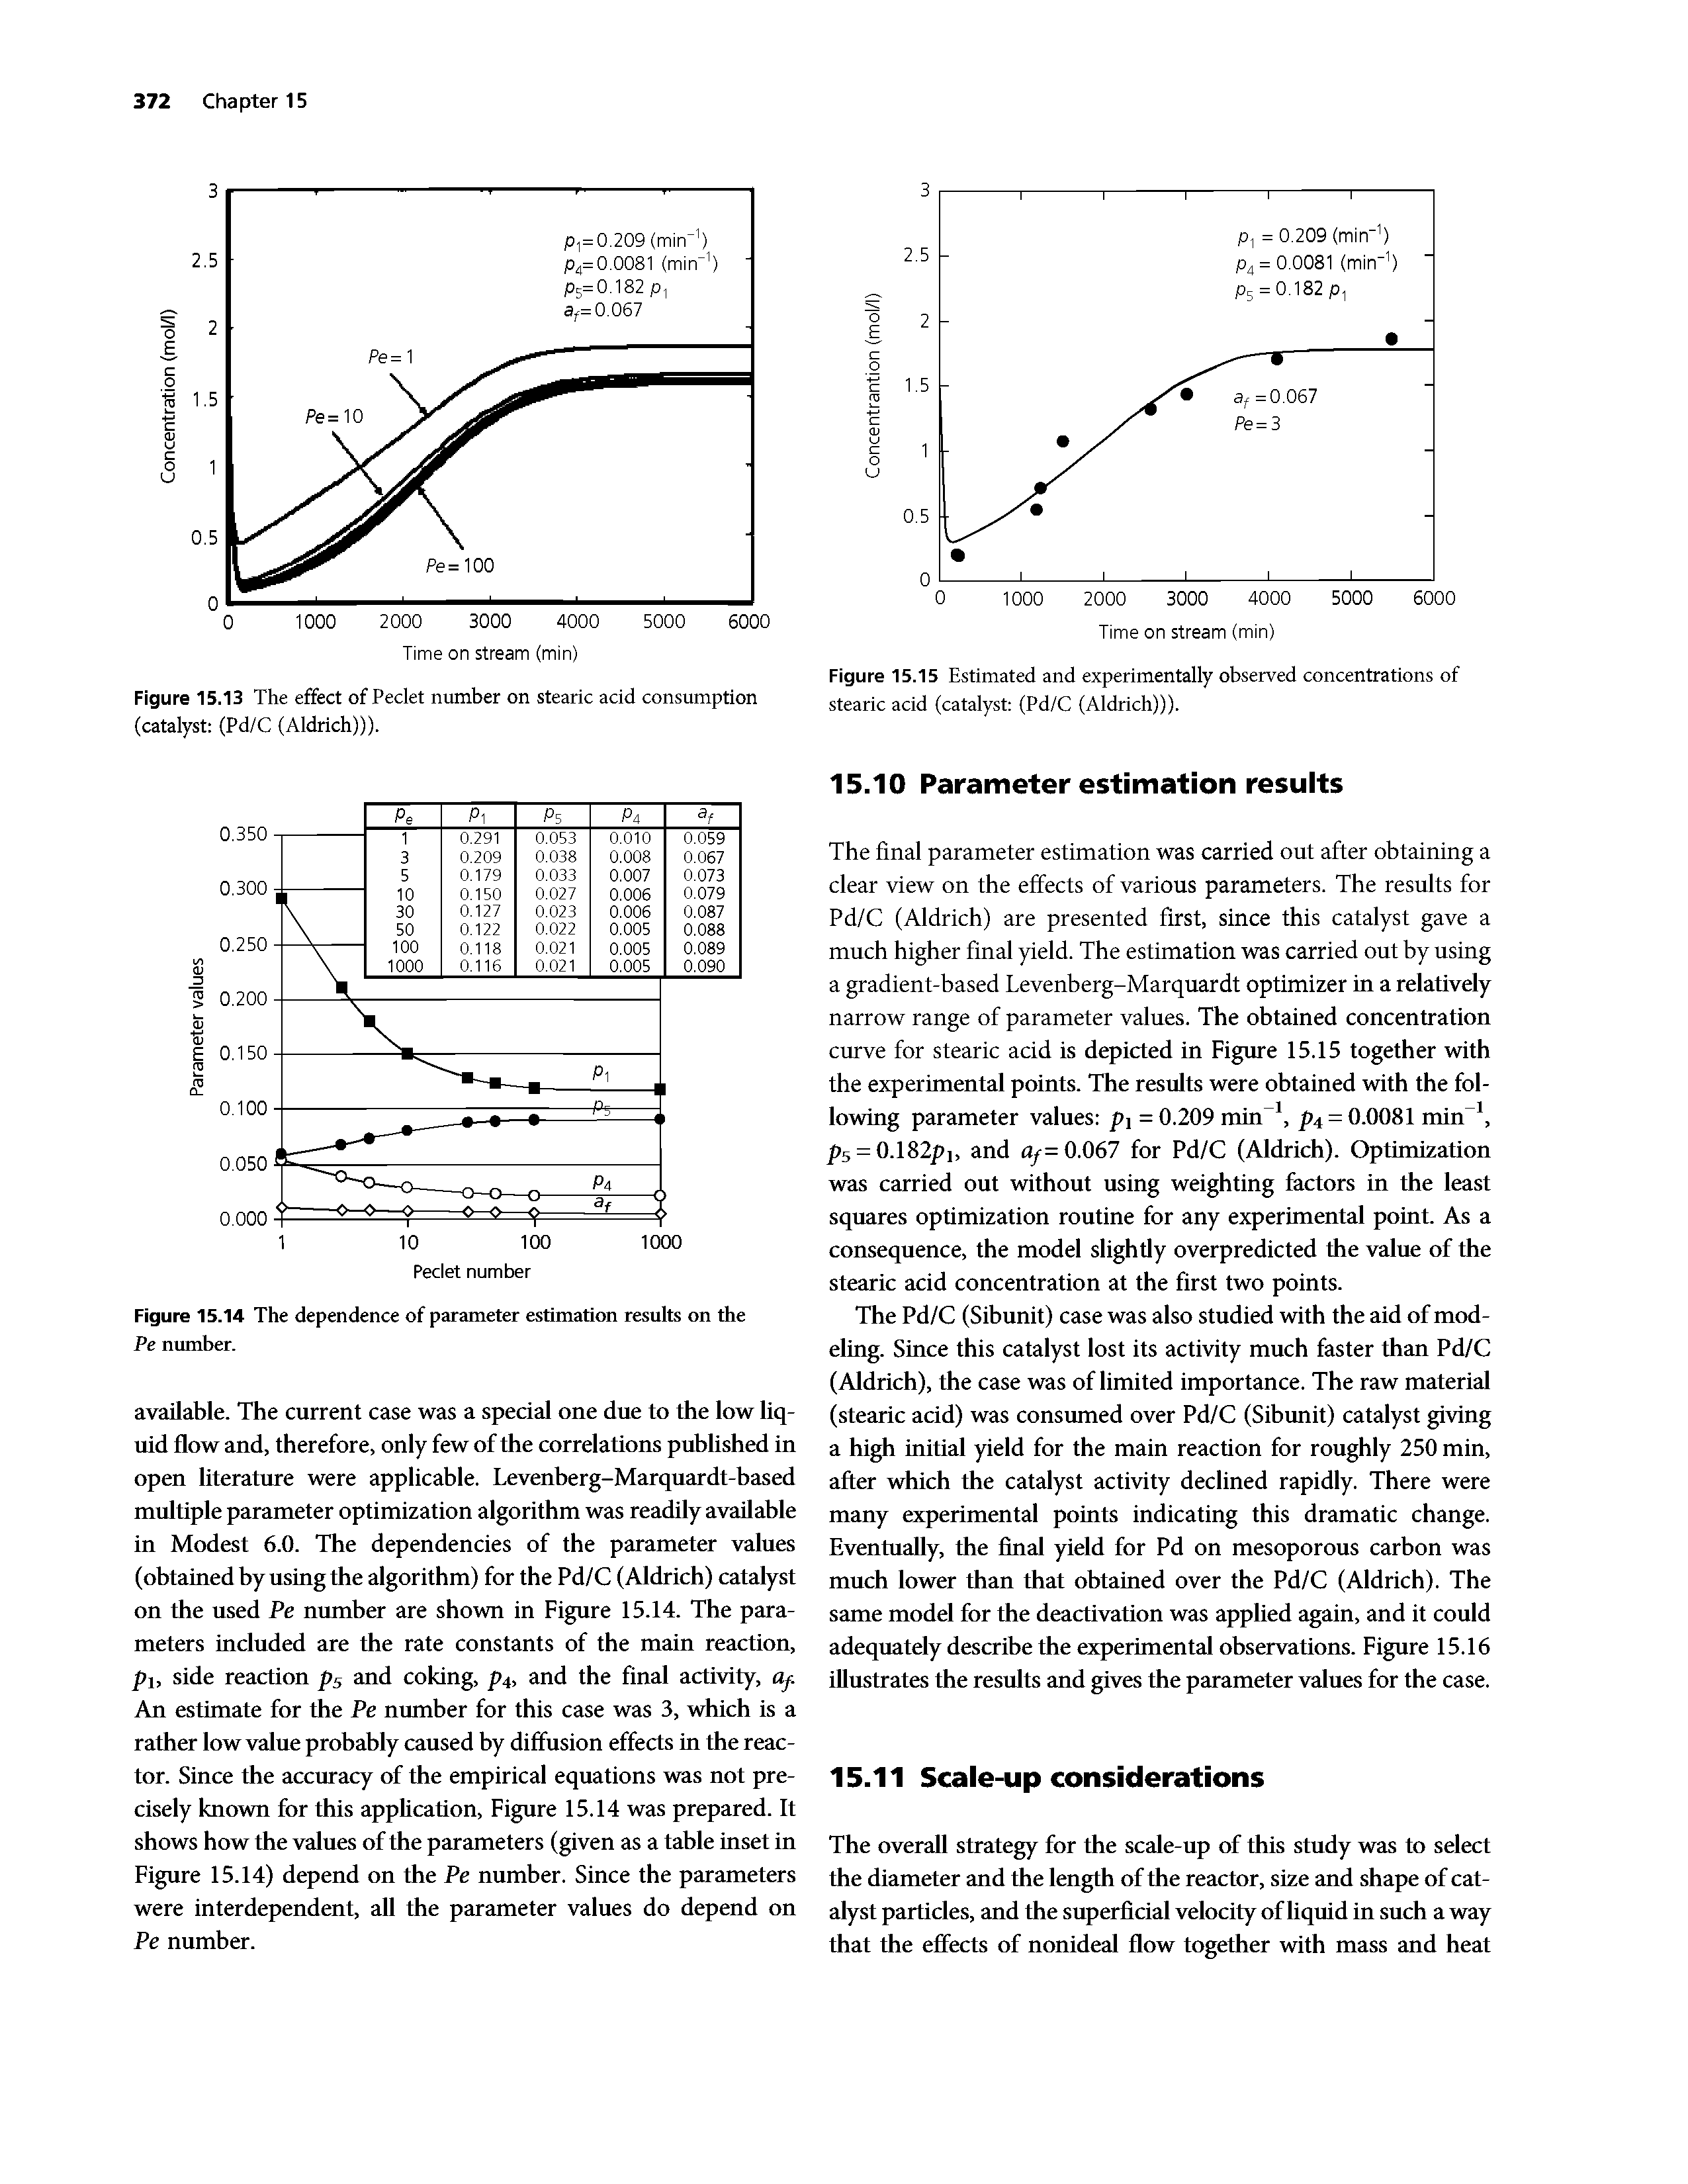 Figure 15.14 The dependence of parameter estimation results on the Pe number.